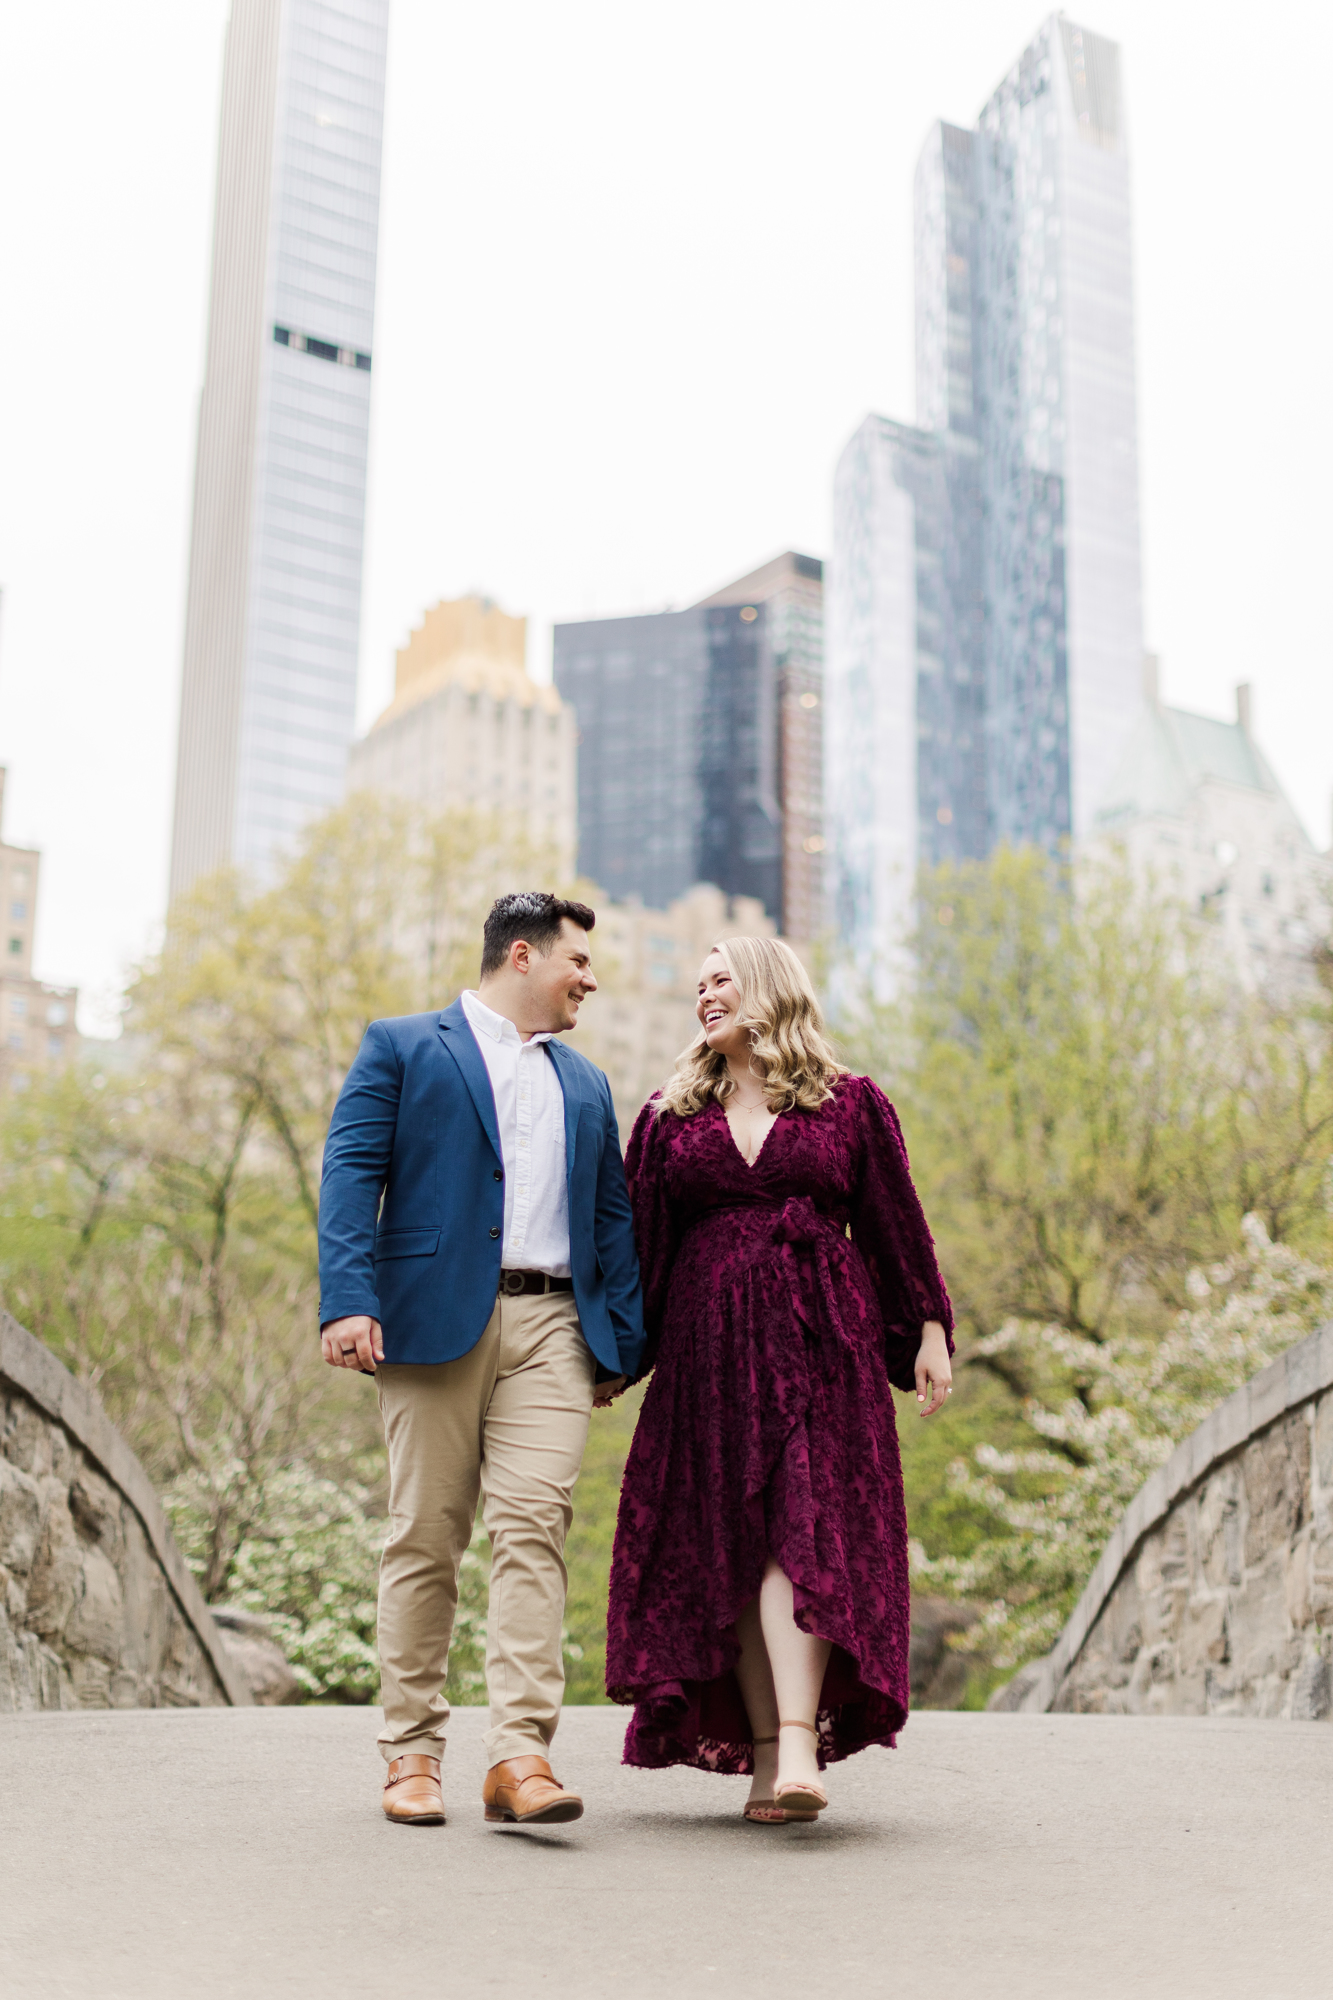 Sweet Engagement Pictures in Central Park